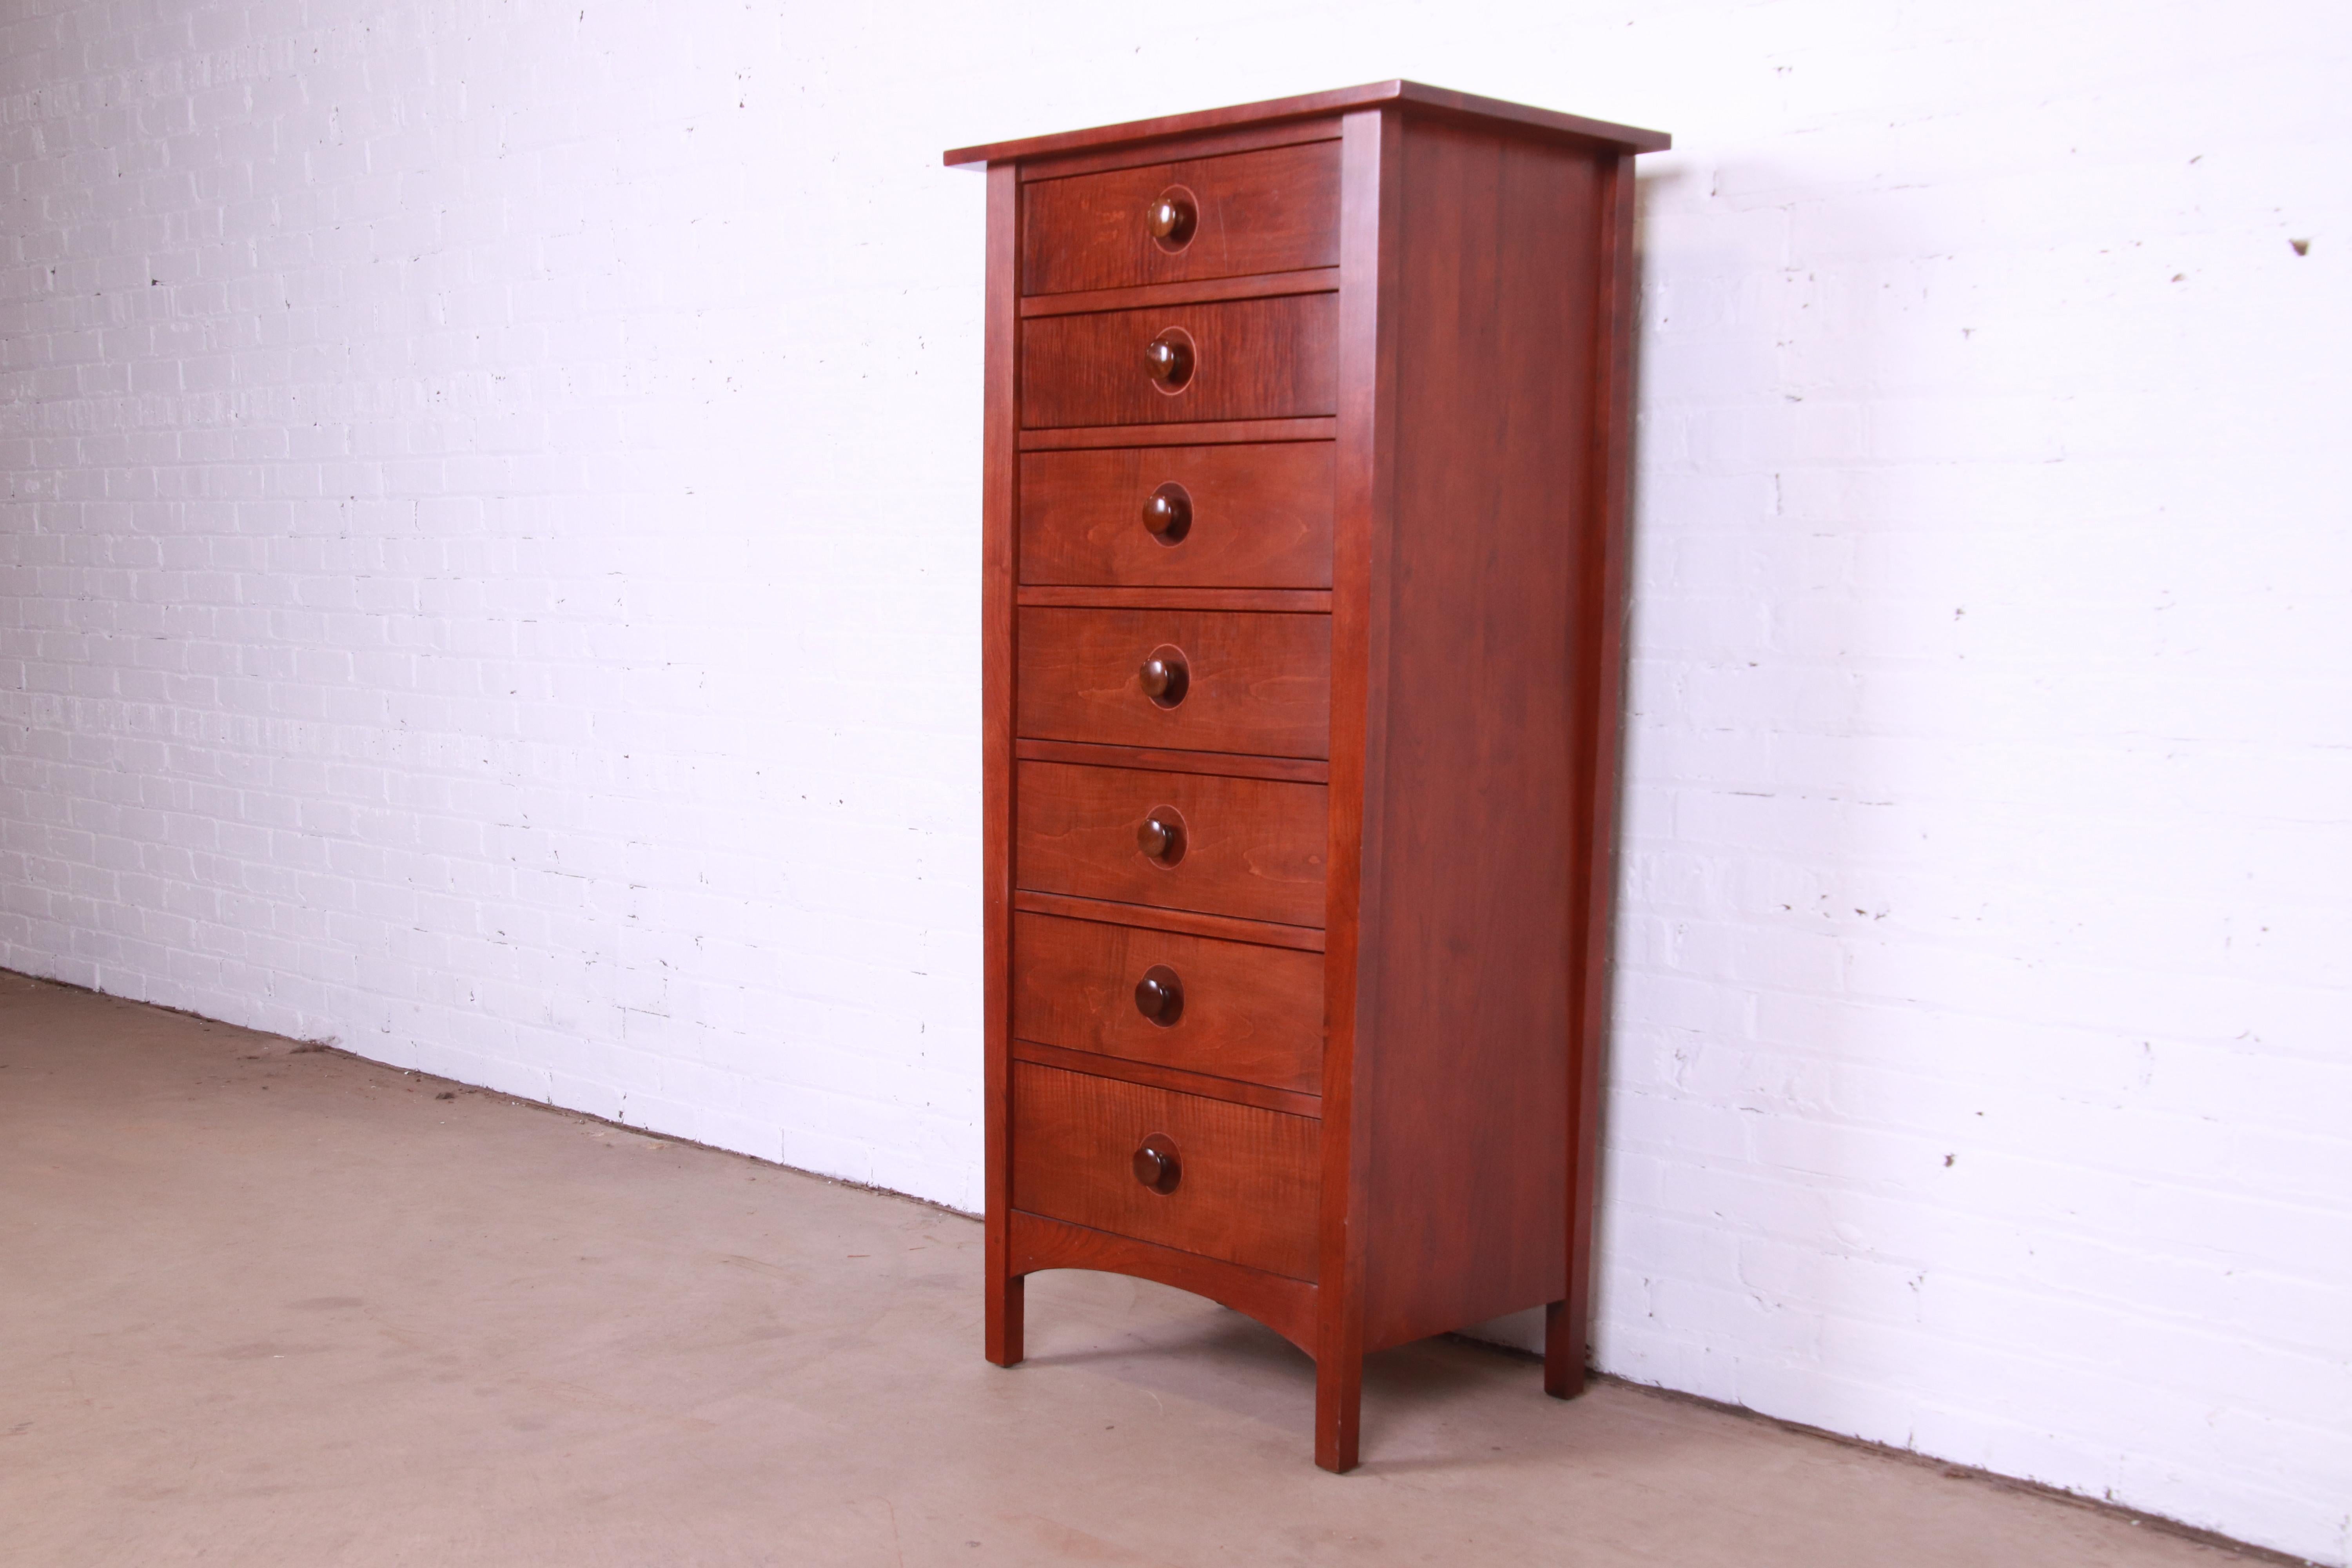 An exceptional Mission Arts & Crafts style cherry wood highboy dresser or lingerie chest

Designed by Harvey Ellis for Stickley Furniture

USA, Circa Early 21st Century

Measures: 26